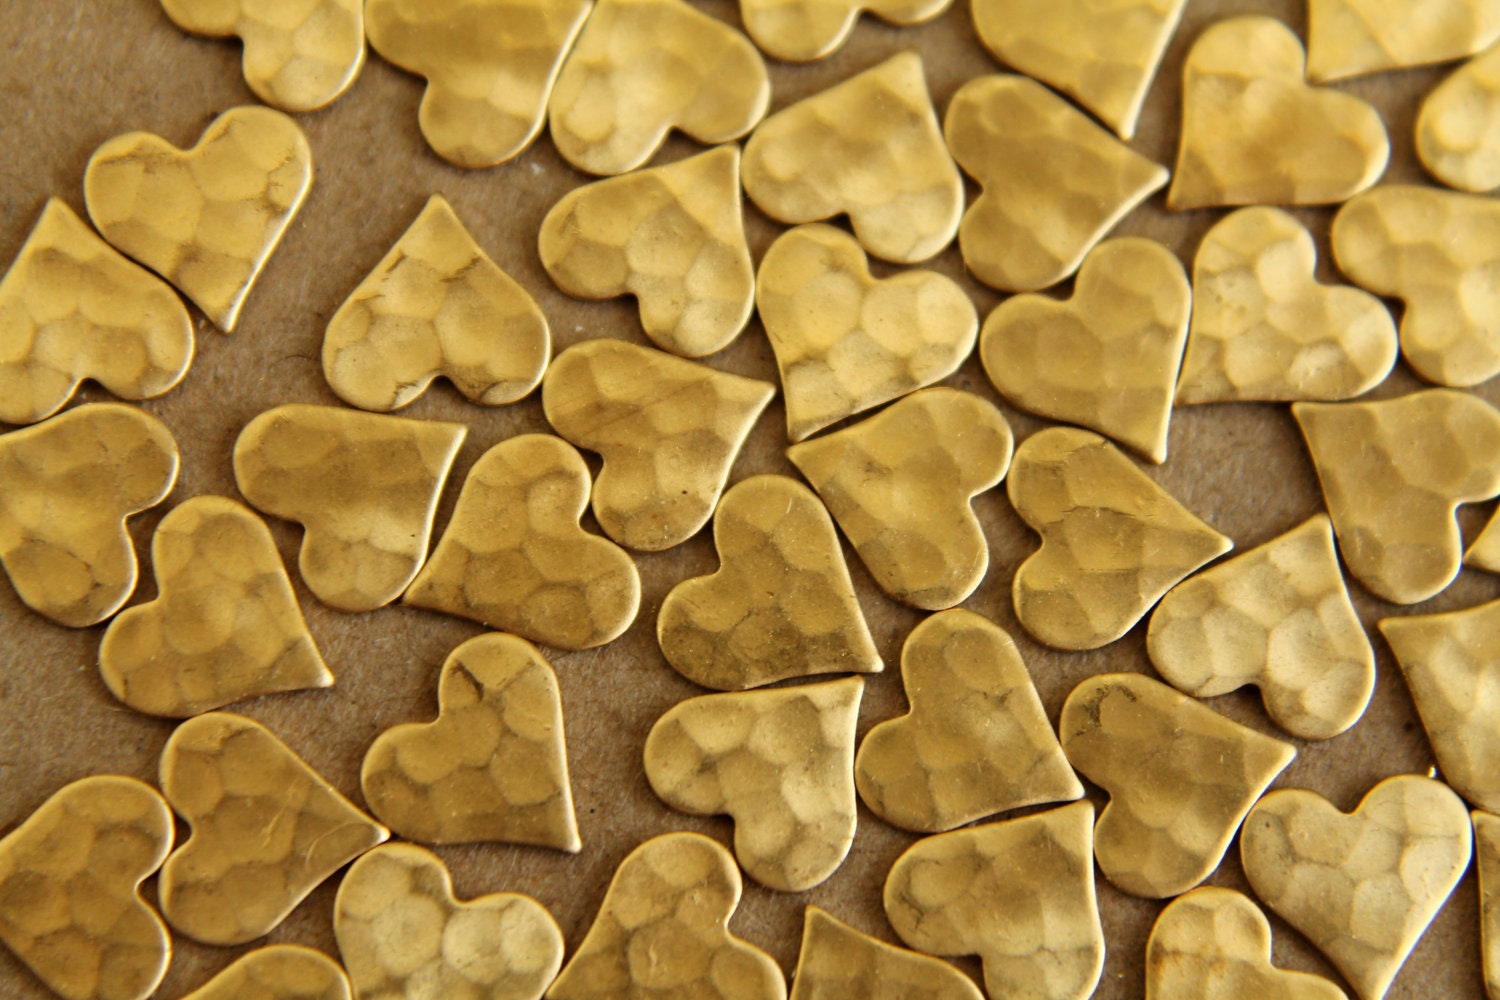 100 Pc. Raw Brass Hammered Heart: 8mm by 8mm Made in USA - Etsy